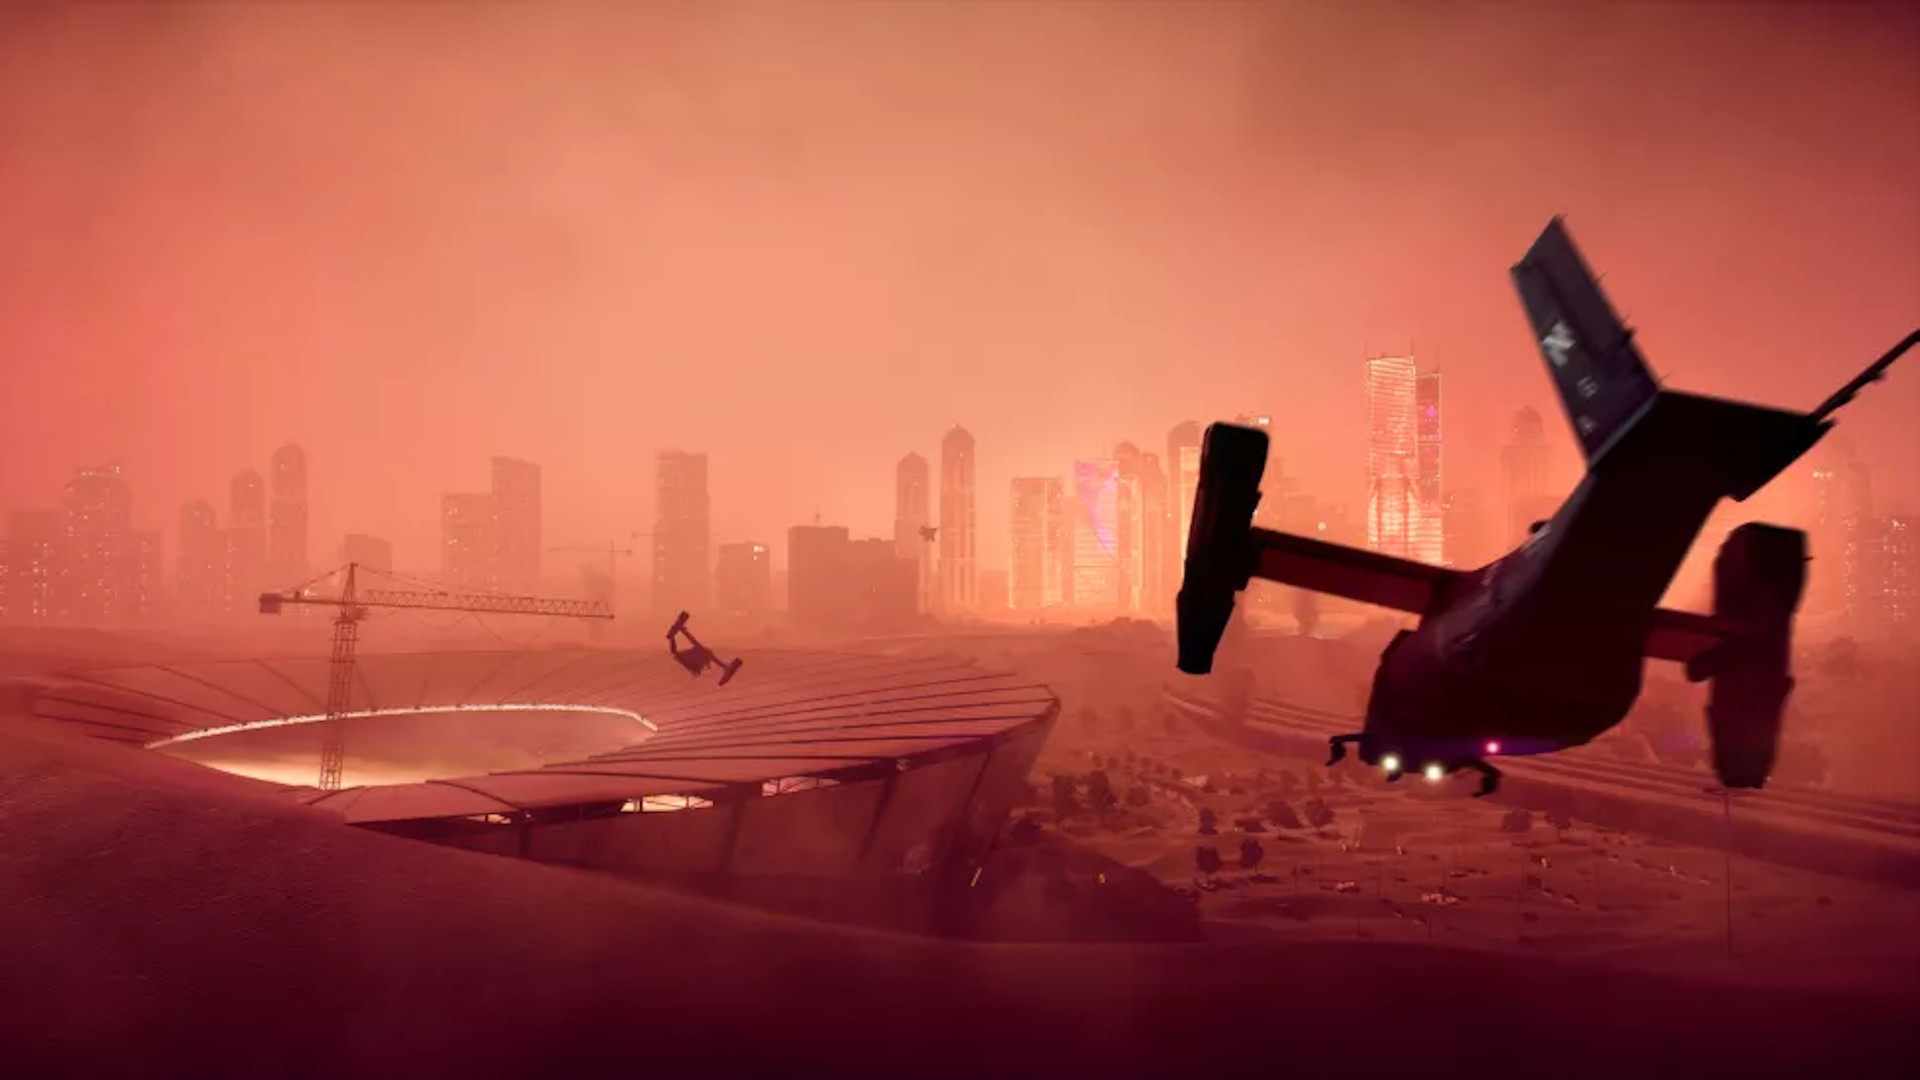 Battlefield 2042 maps: VTOLs flying into a city during a sandstorm.